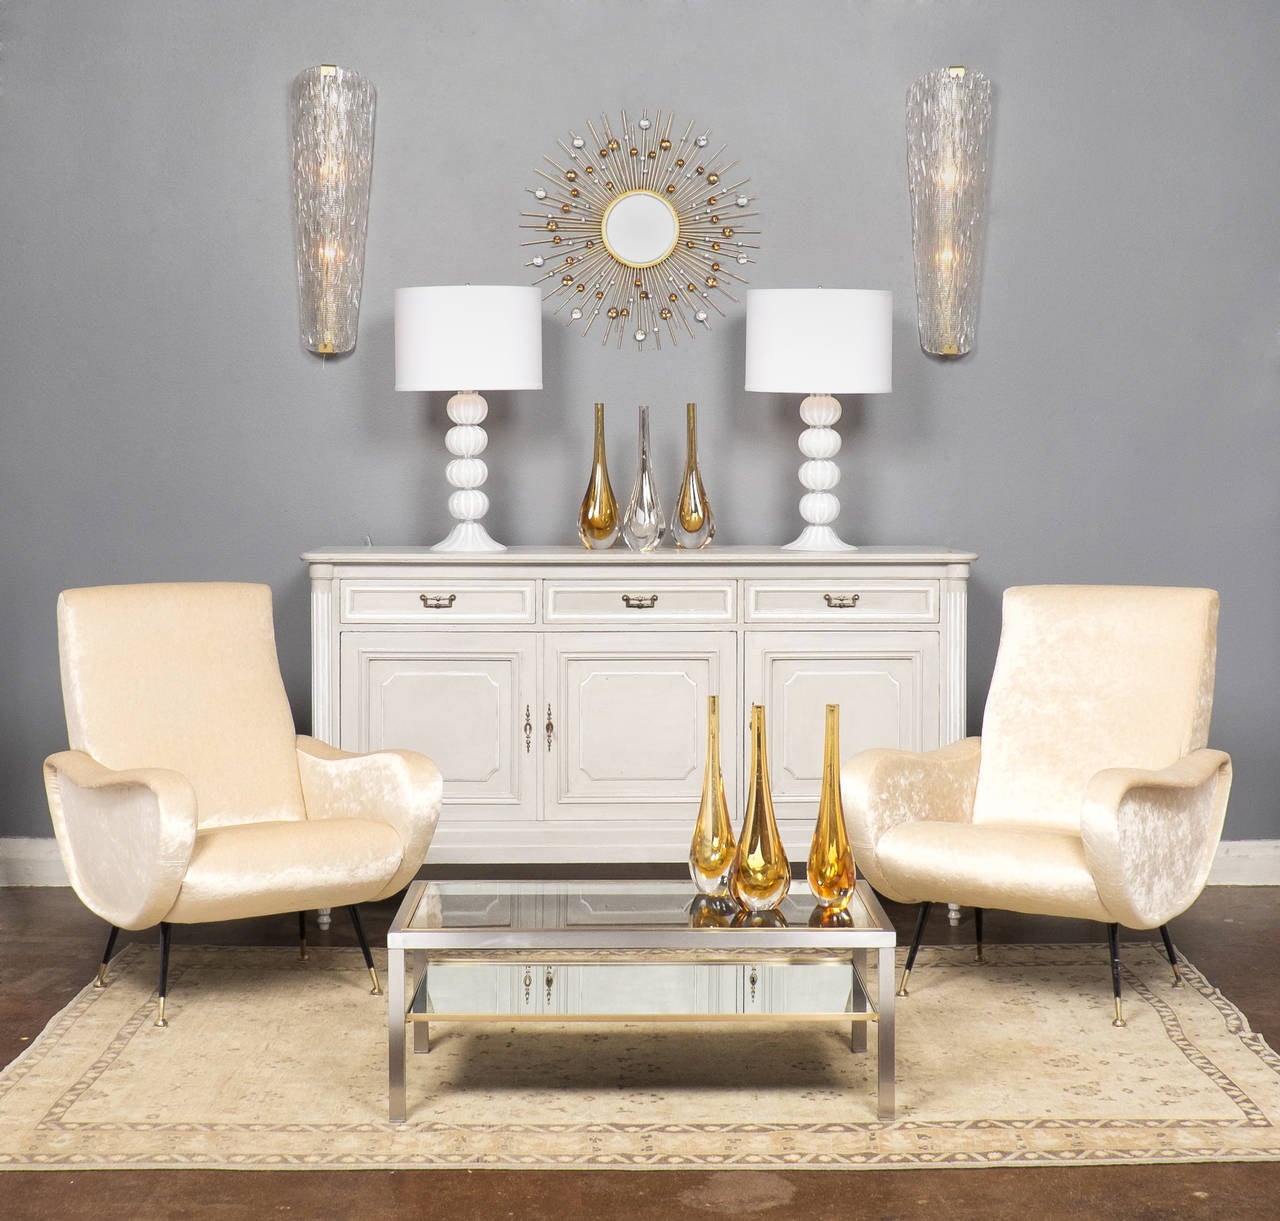 French vintage coffee table in brushed steel and brass with glass top and inset mirrored glass bottom shelf. We adore the mix of metals and the thoughtful details on this piece.